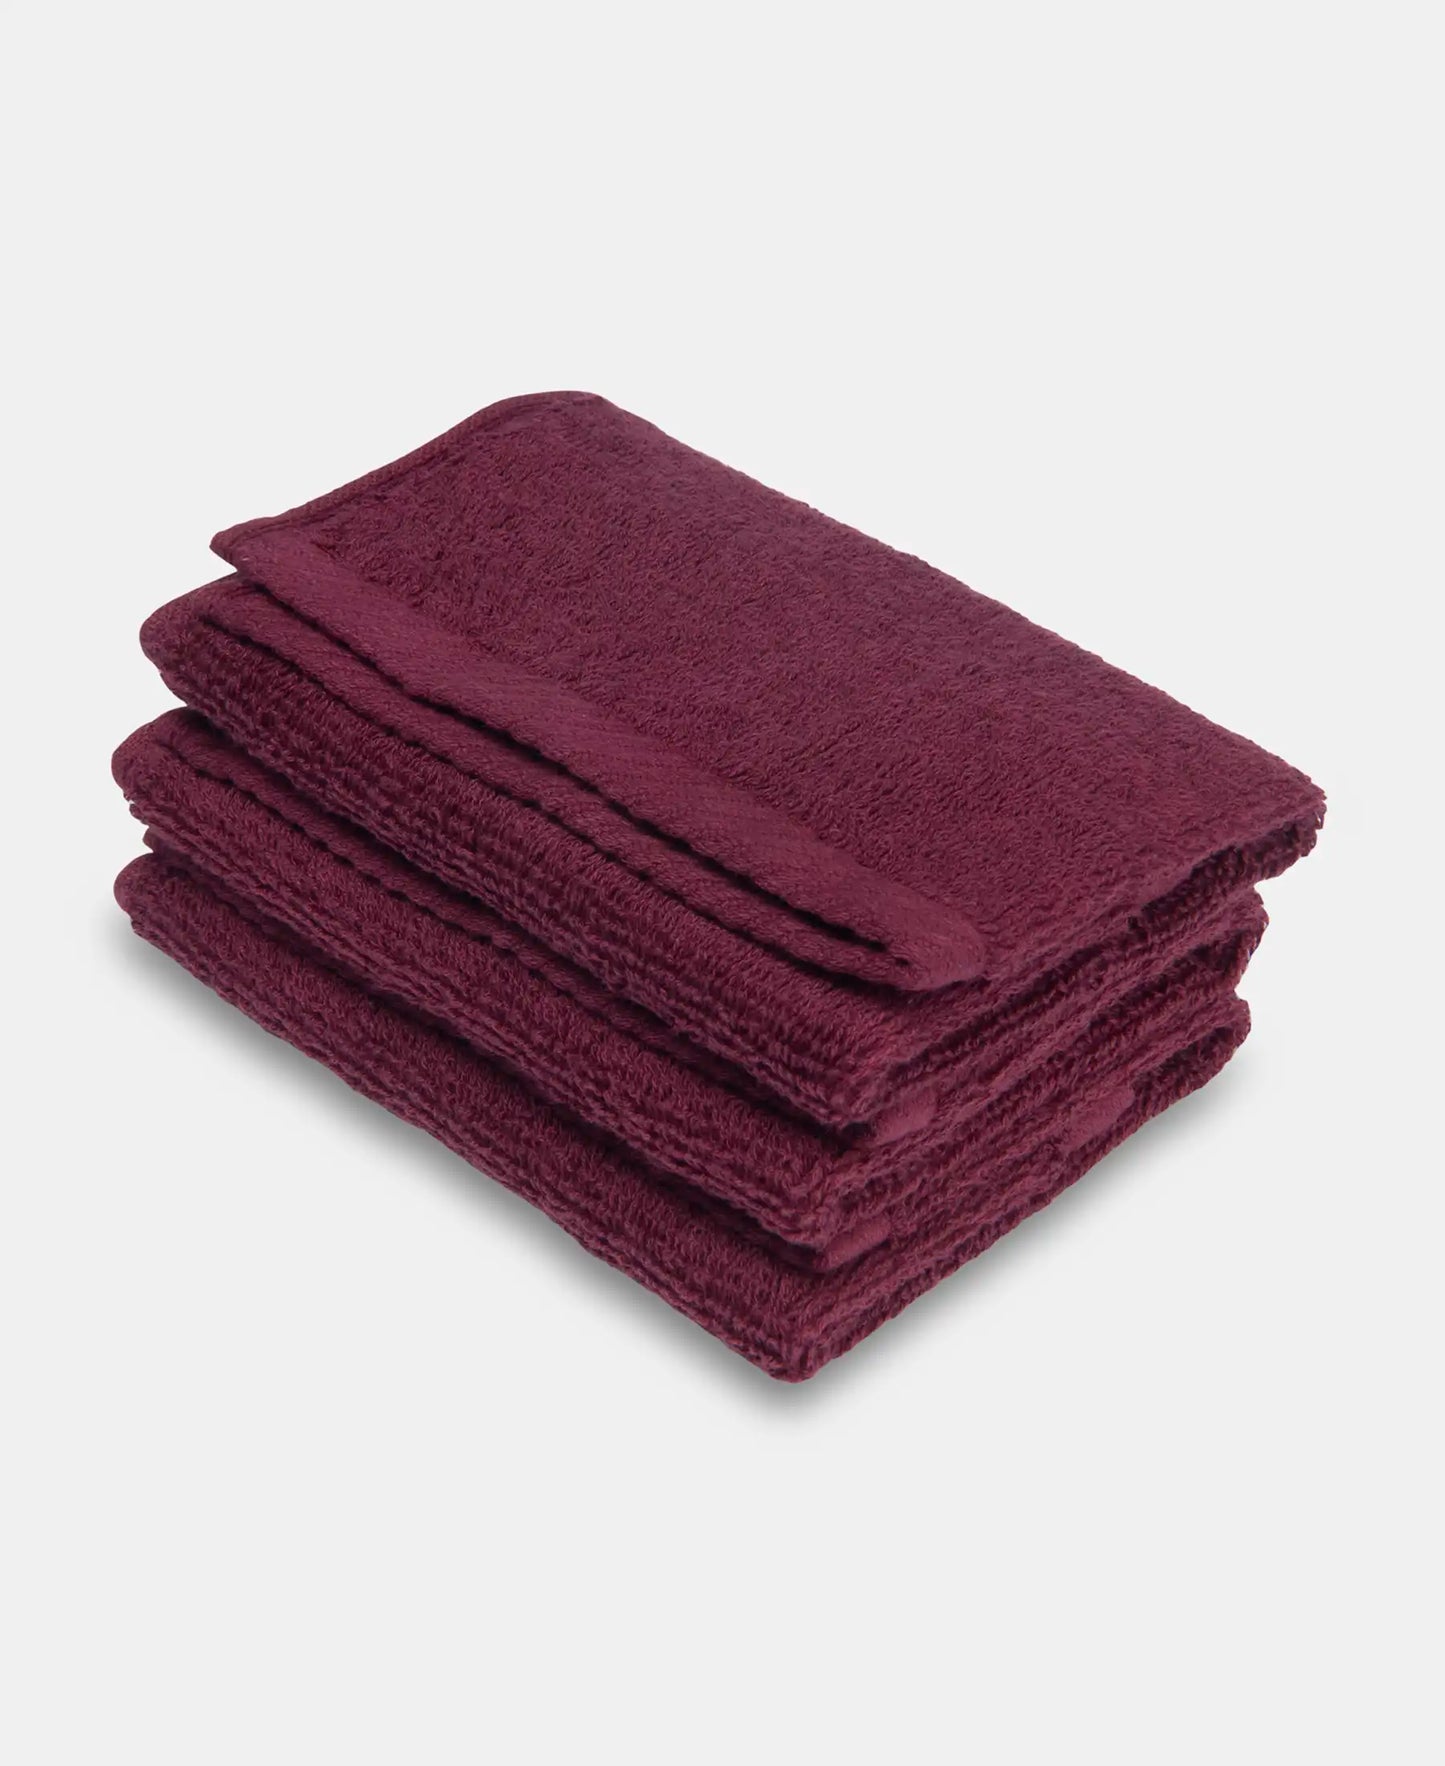 Cotton Terry Ultrasoft and Durable Solid Face Towel - Burgundy-1